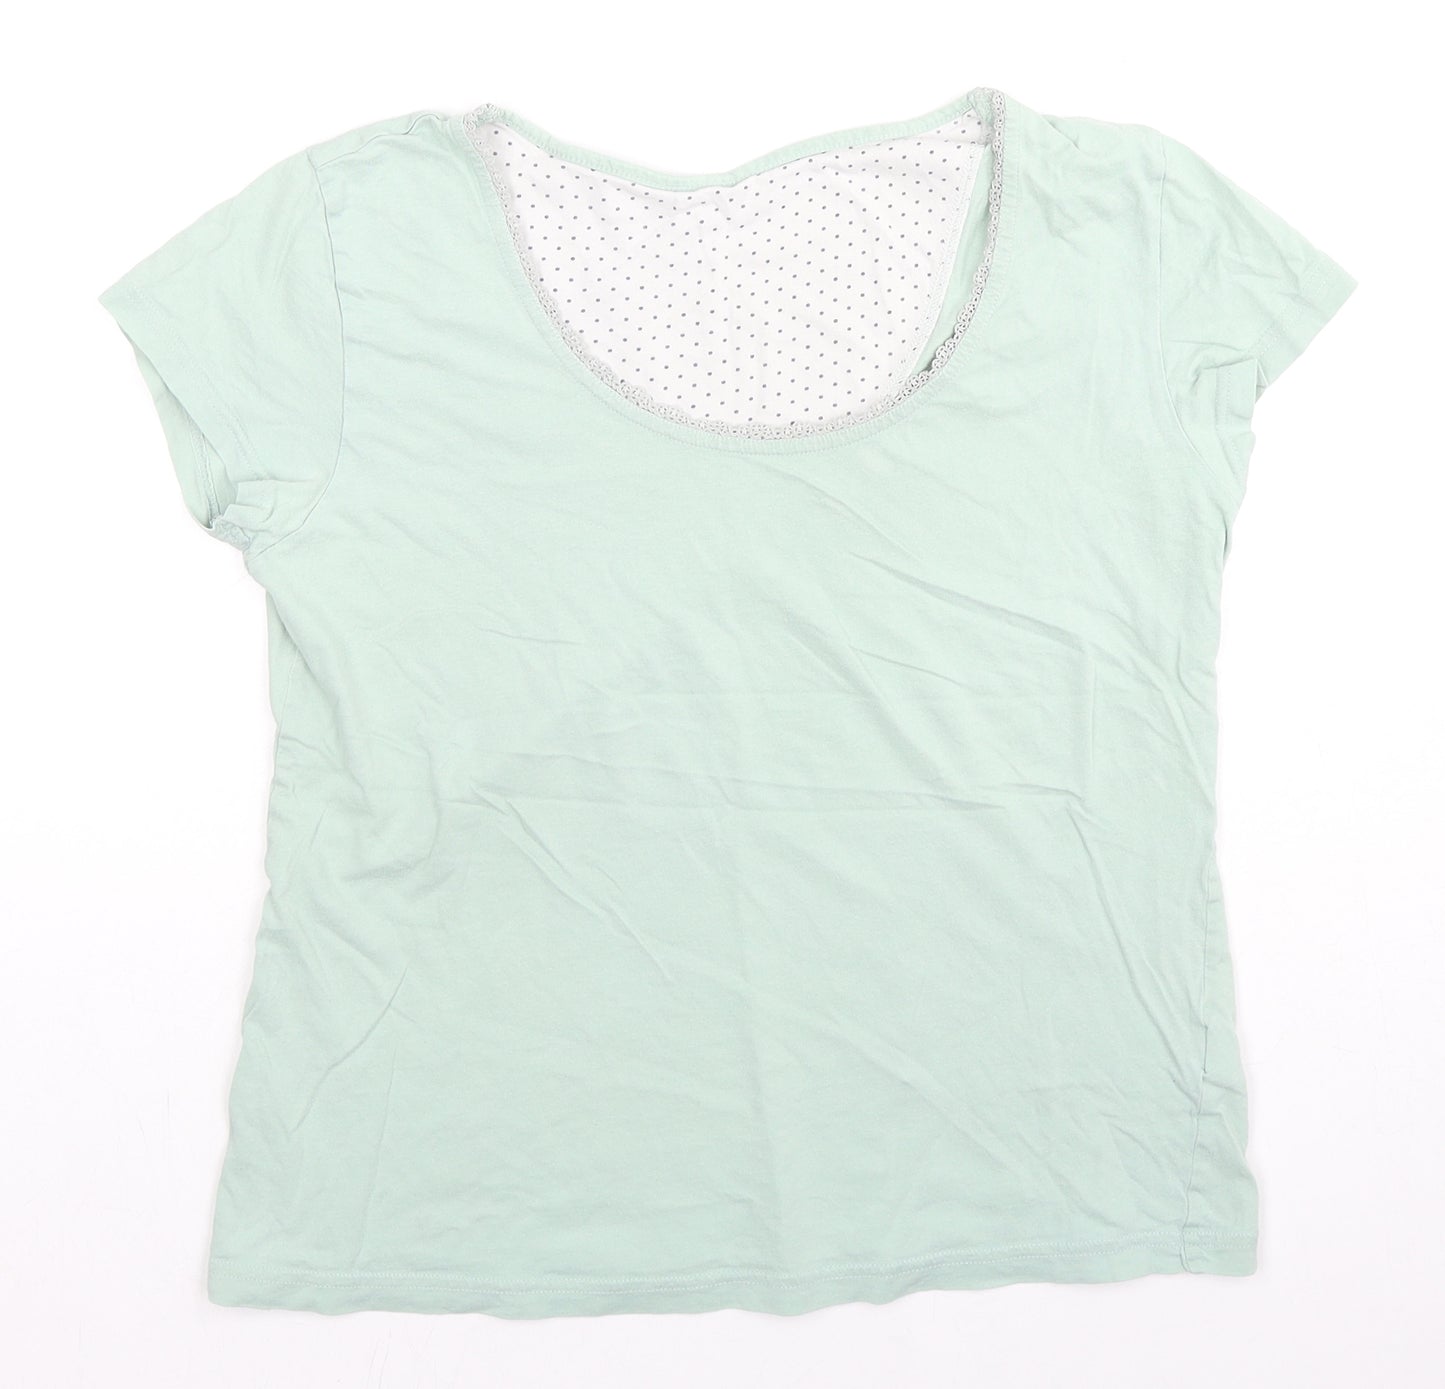 Marks and Spencer Womens Green Cotton Basic T-Shirt Size 8 Scoop Neck - Lace Collar